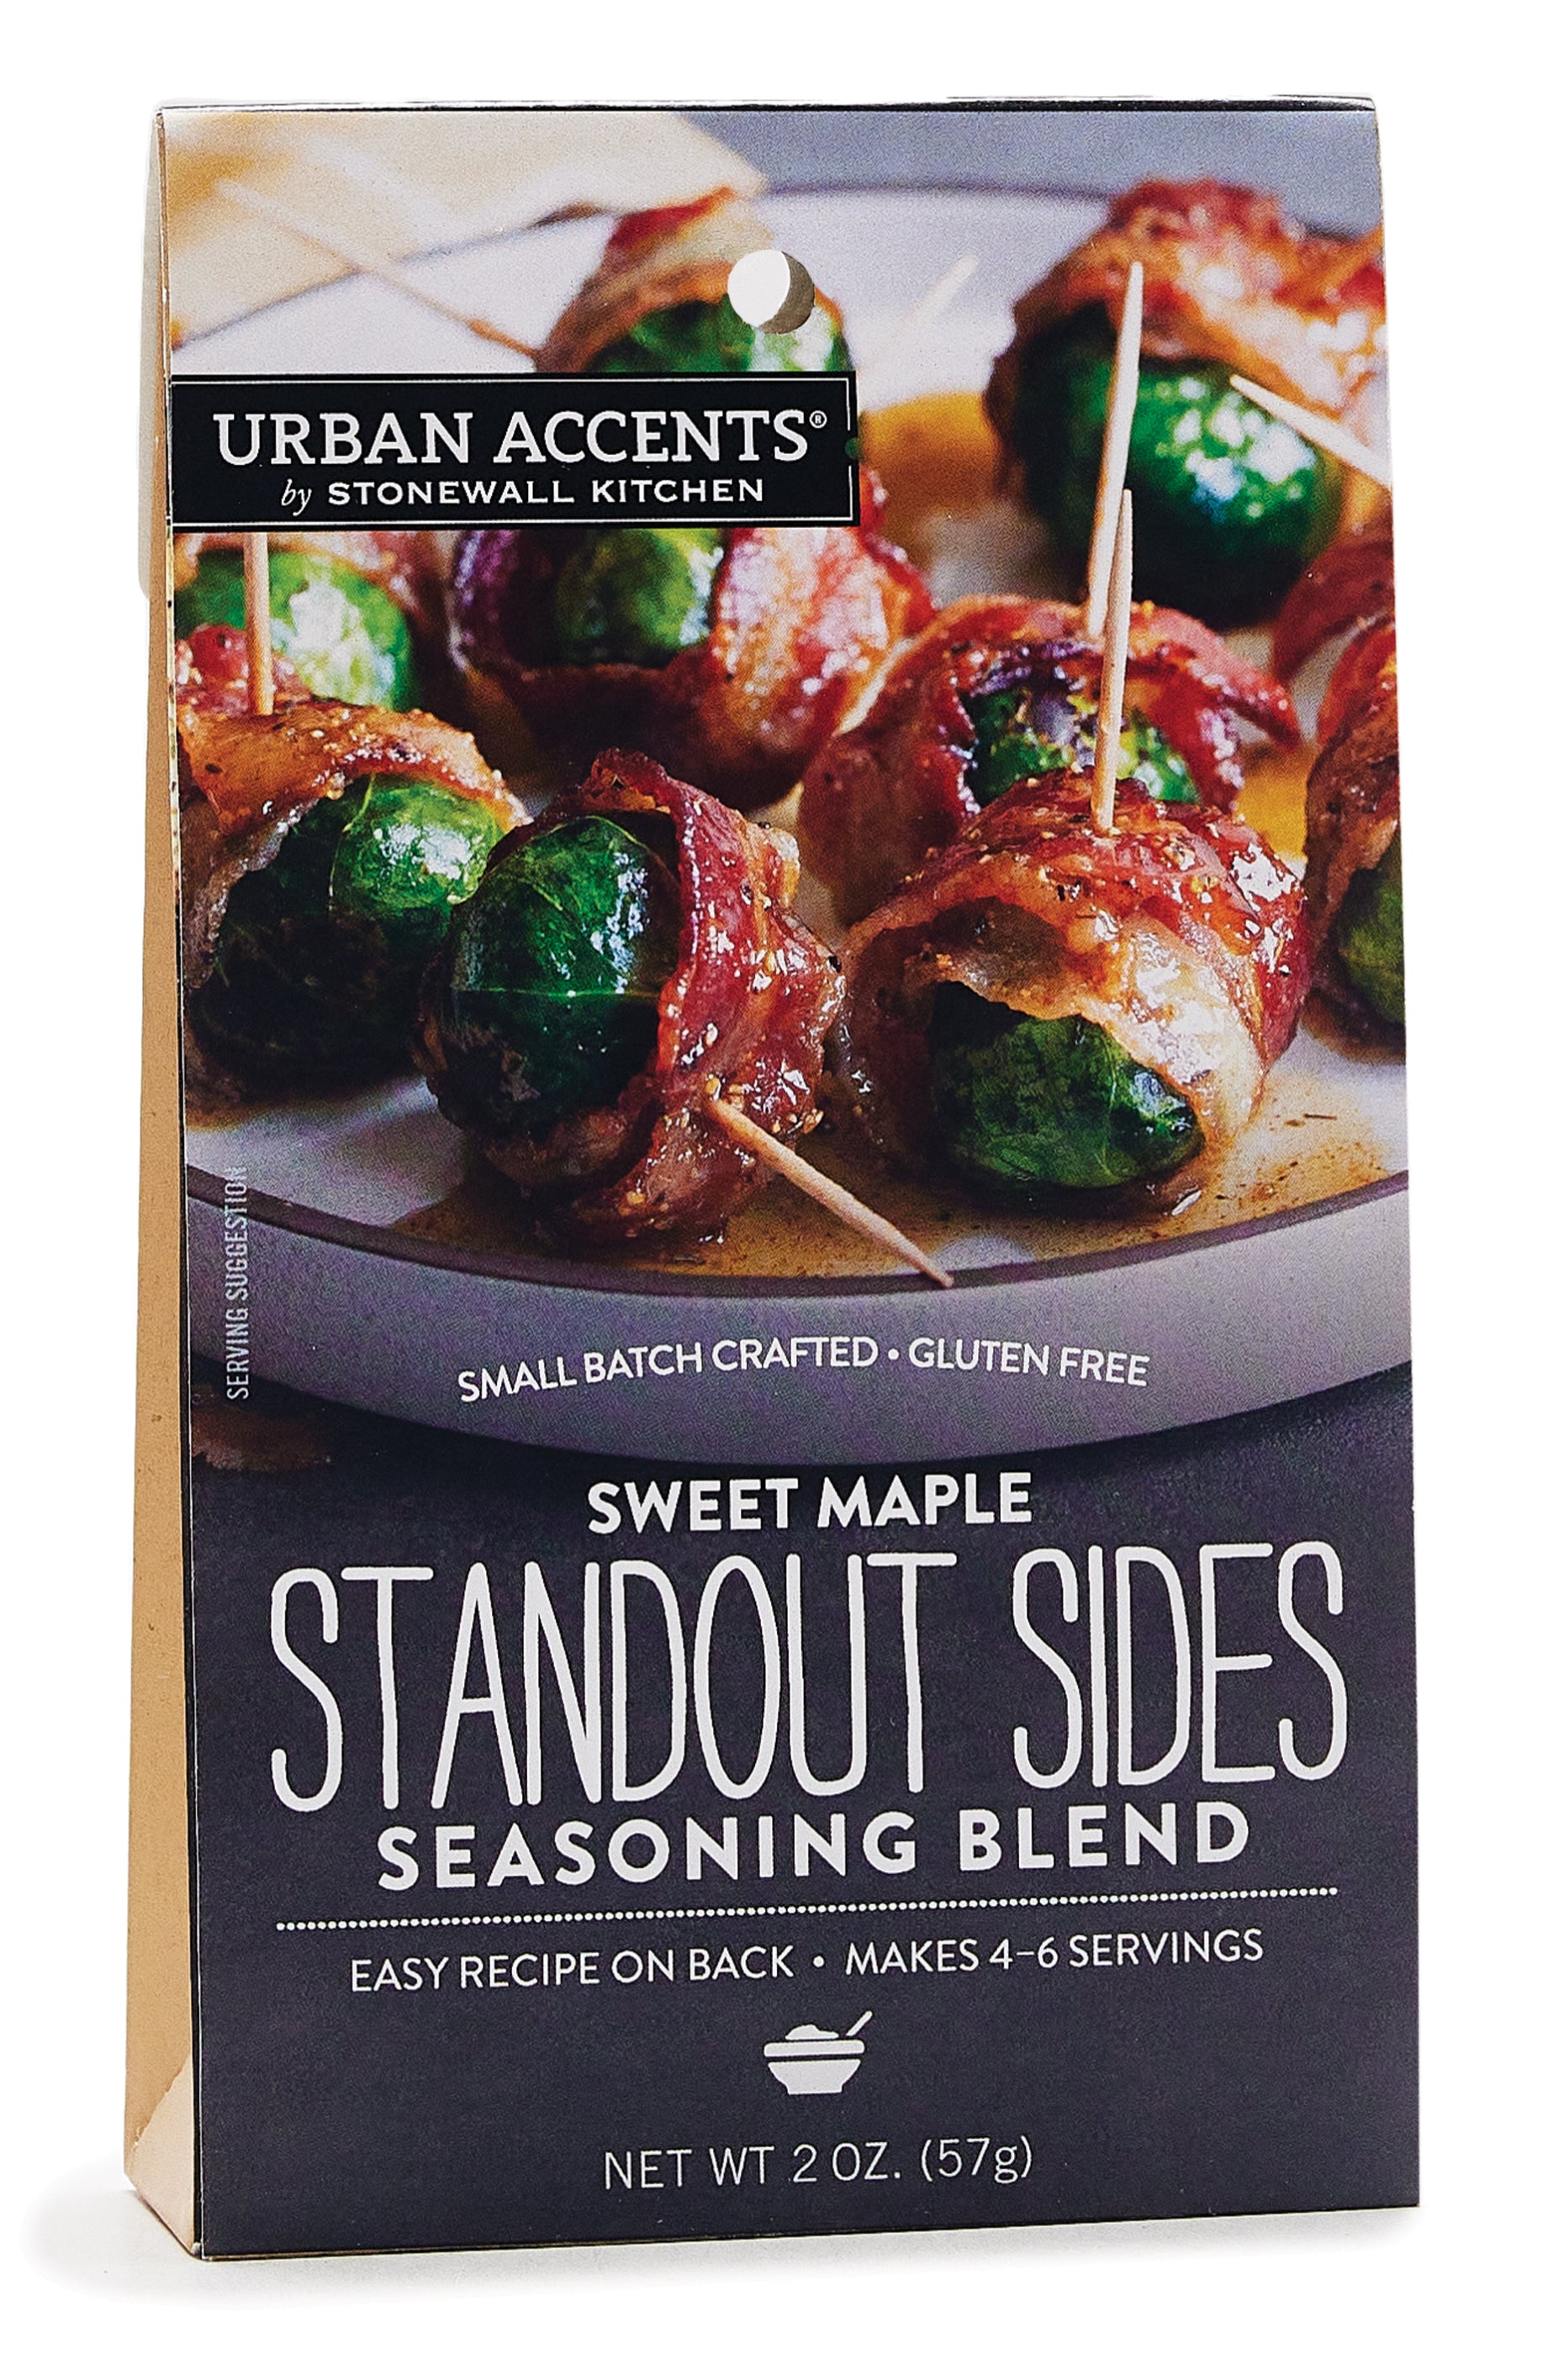 Urban Accents Sweet Maple Standout Sides Seasoning Blend - Olive Oil Etcetera 